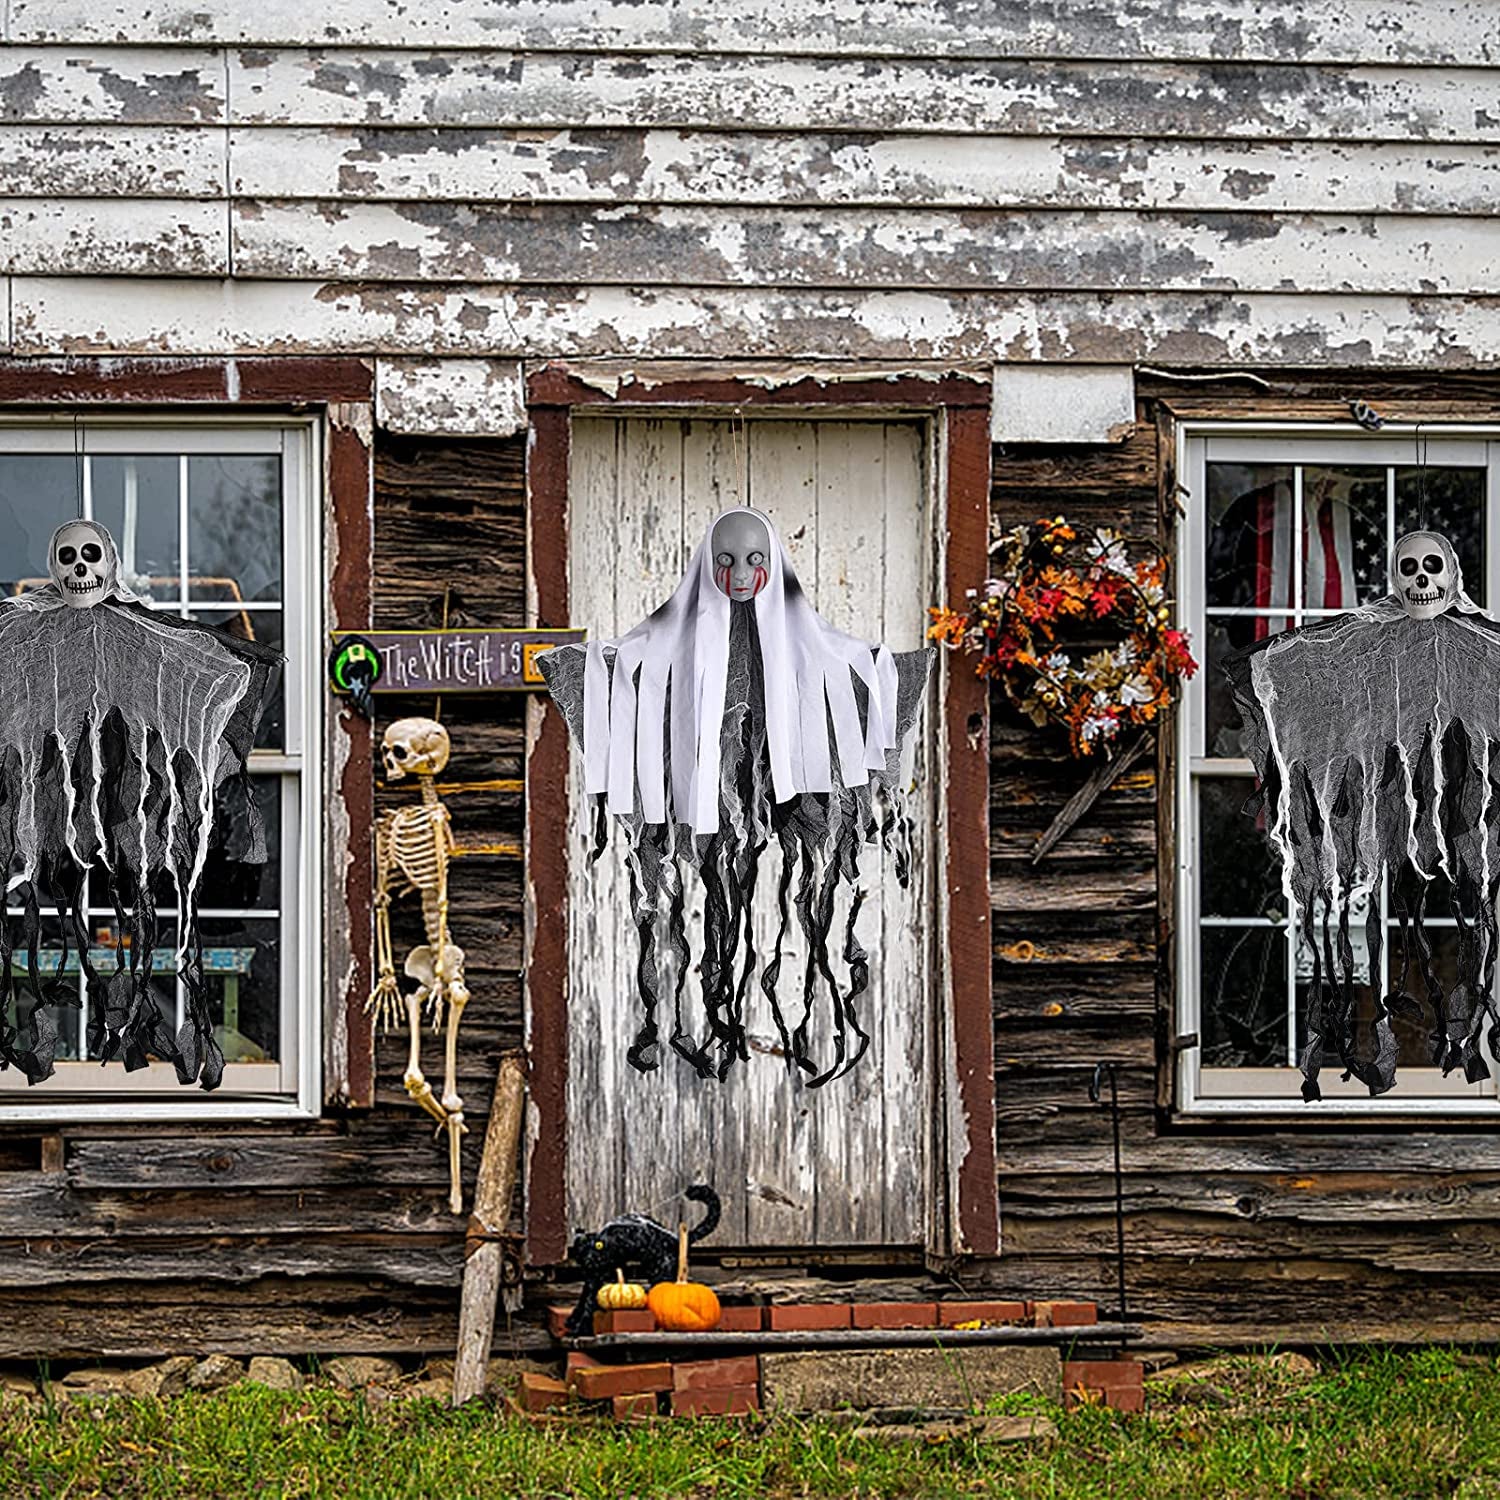 Hanging Halloween Ghosts Decorations 2 Pcs Halloween Hanging Grim Reapers Skeleton Hanging Ghost Props Halloween Skeleton Flying Ghost Props for Halloween Party Haunted House Prop Décor